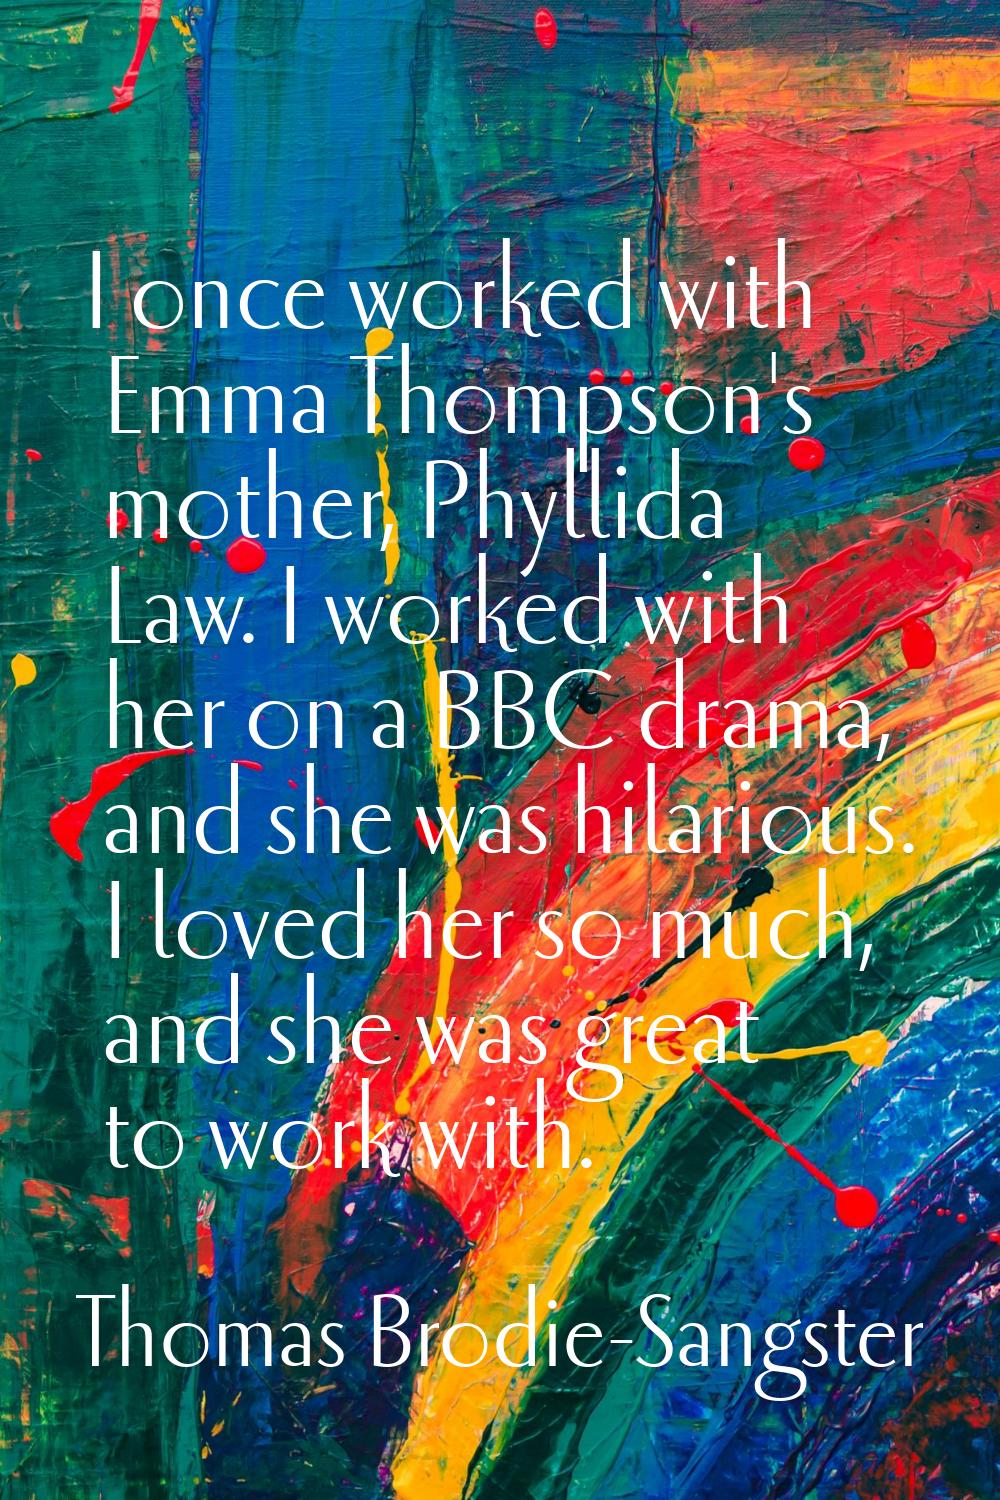 I once worked with Emma Thompson's mother, Phyllida Law. I worked with her on a BBC drama, and she 